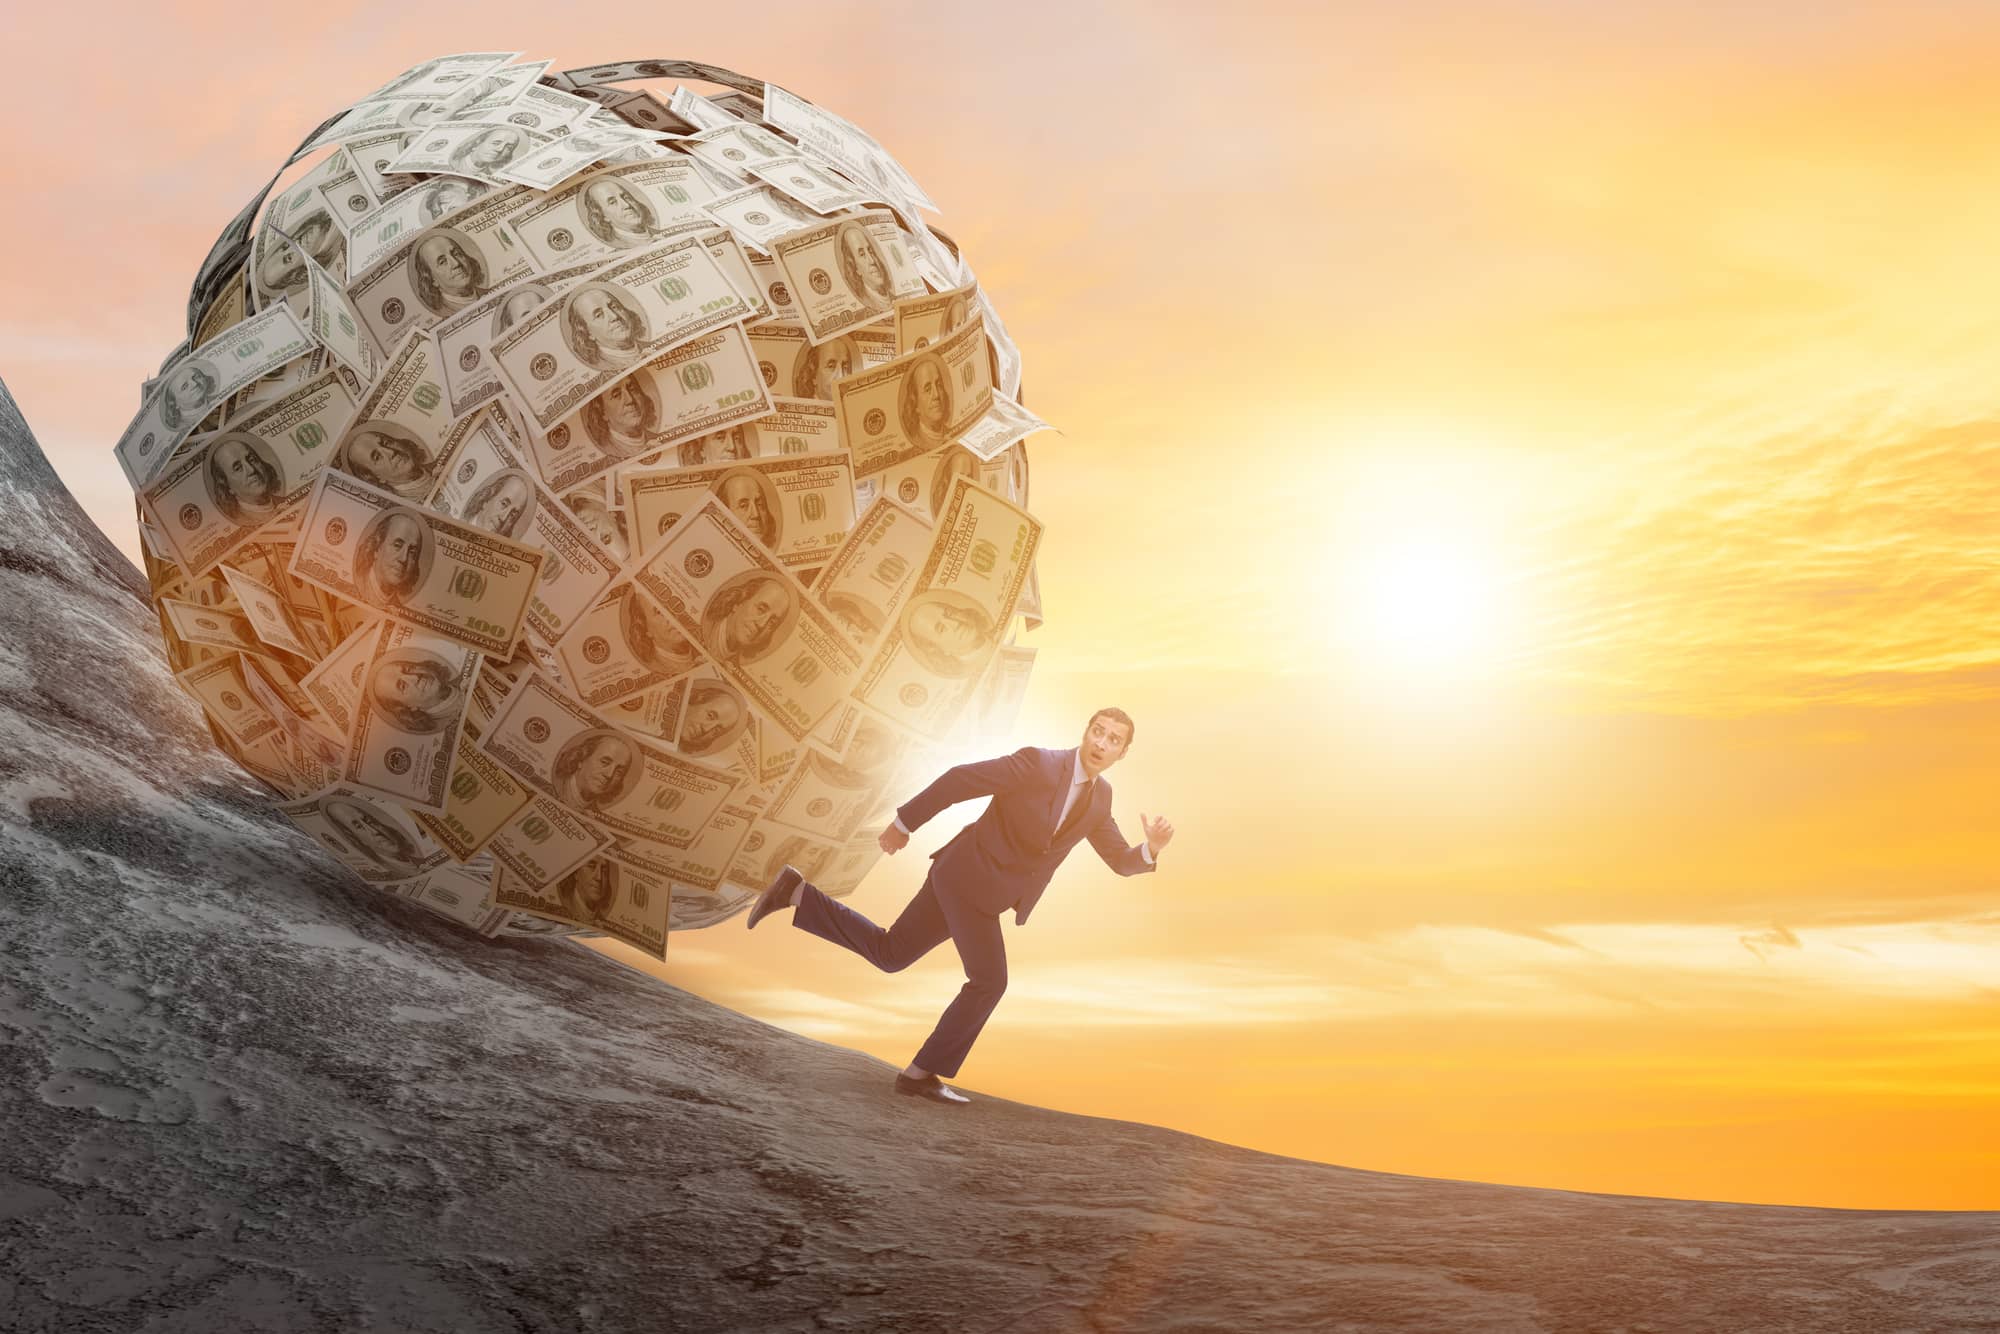 Man running away from a large ball of money rolling downhill.